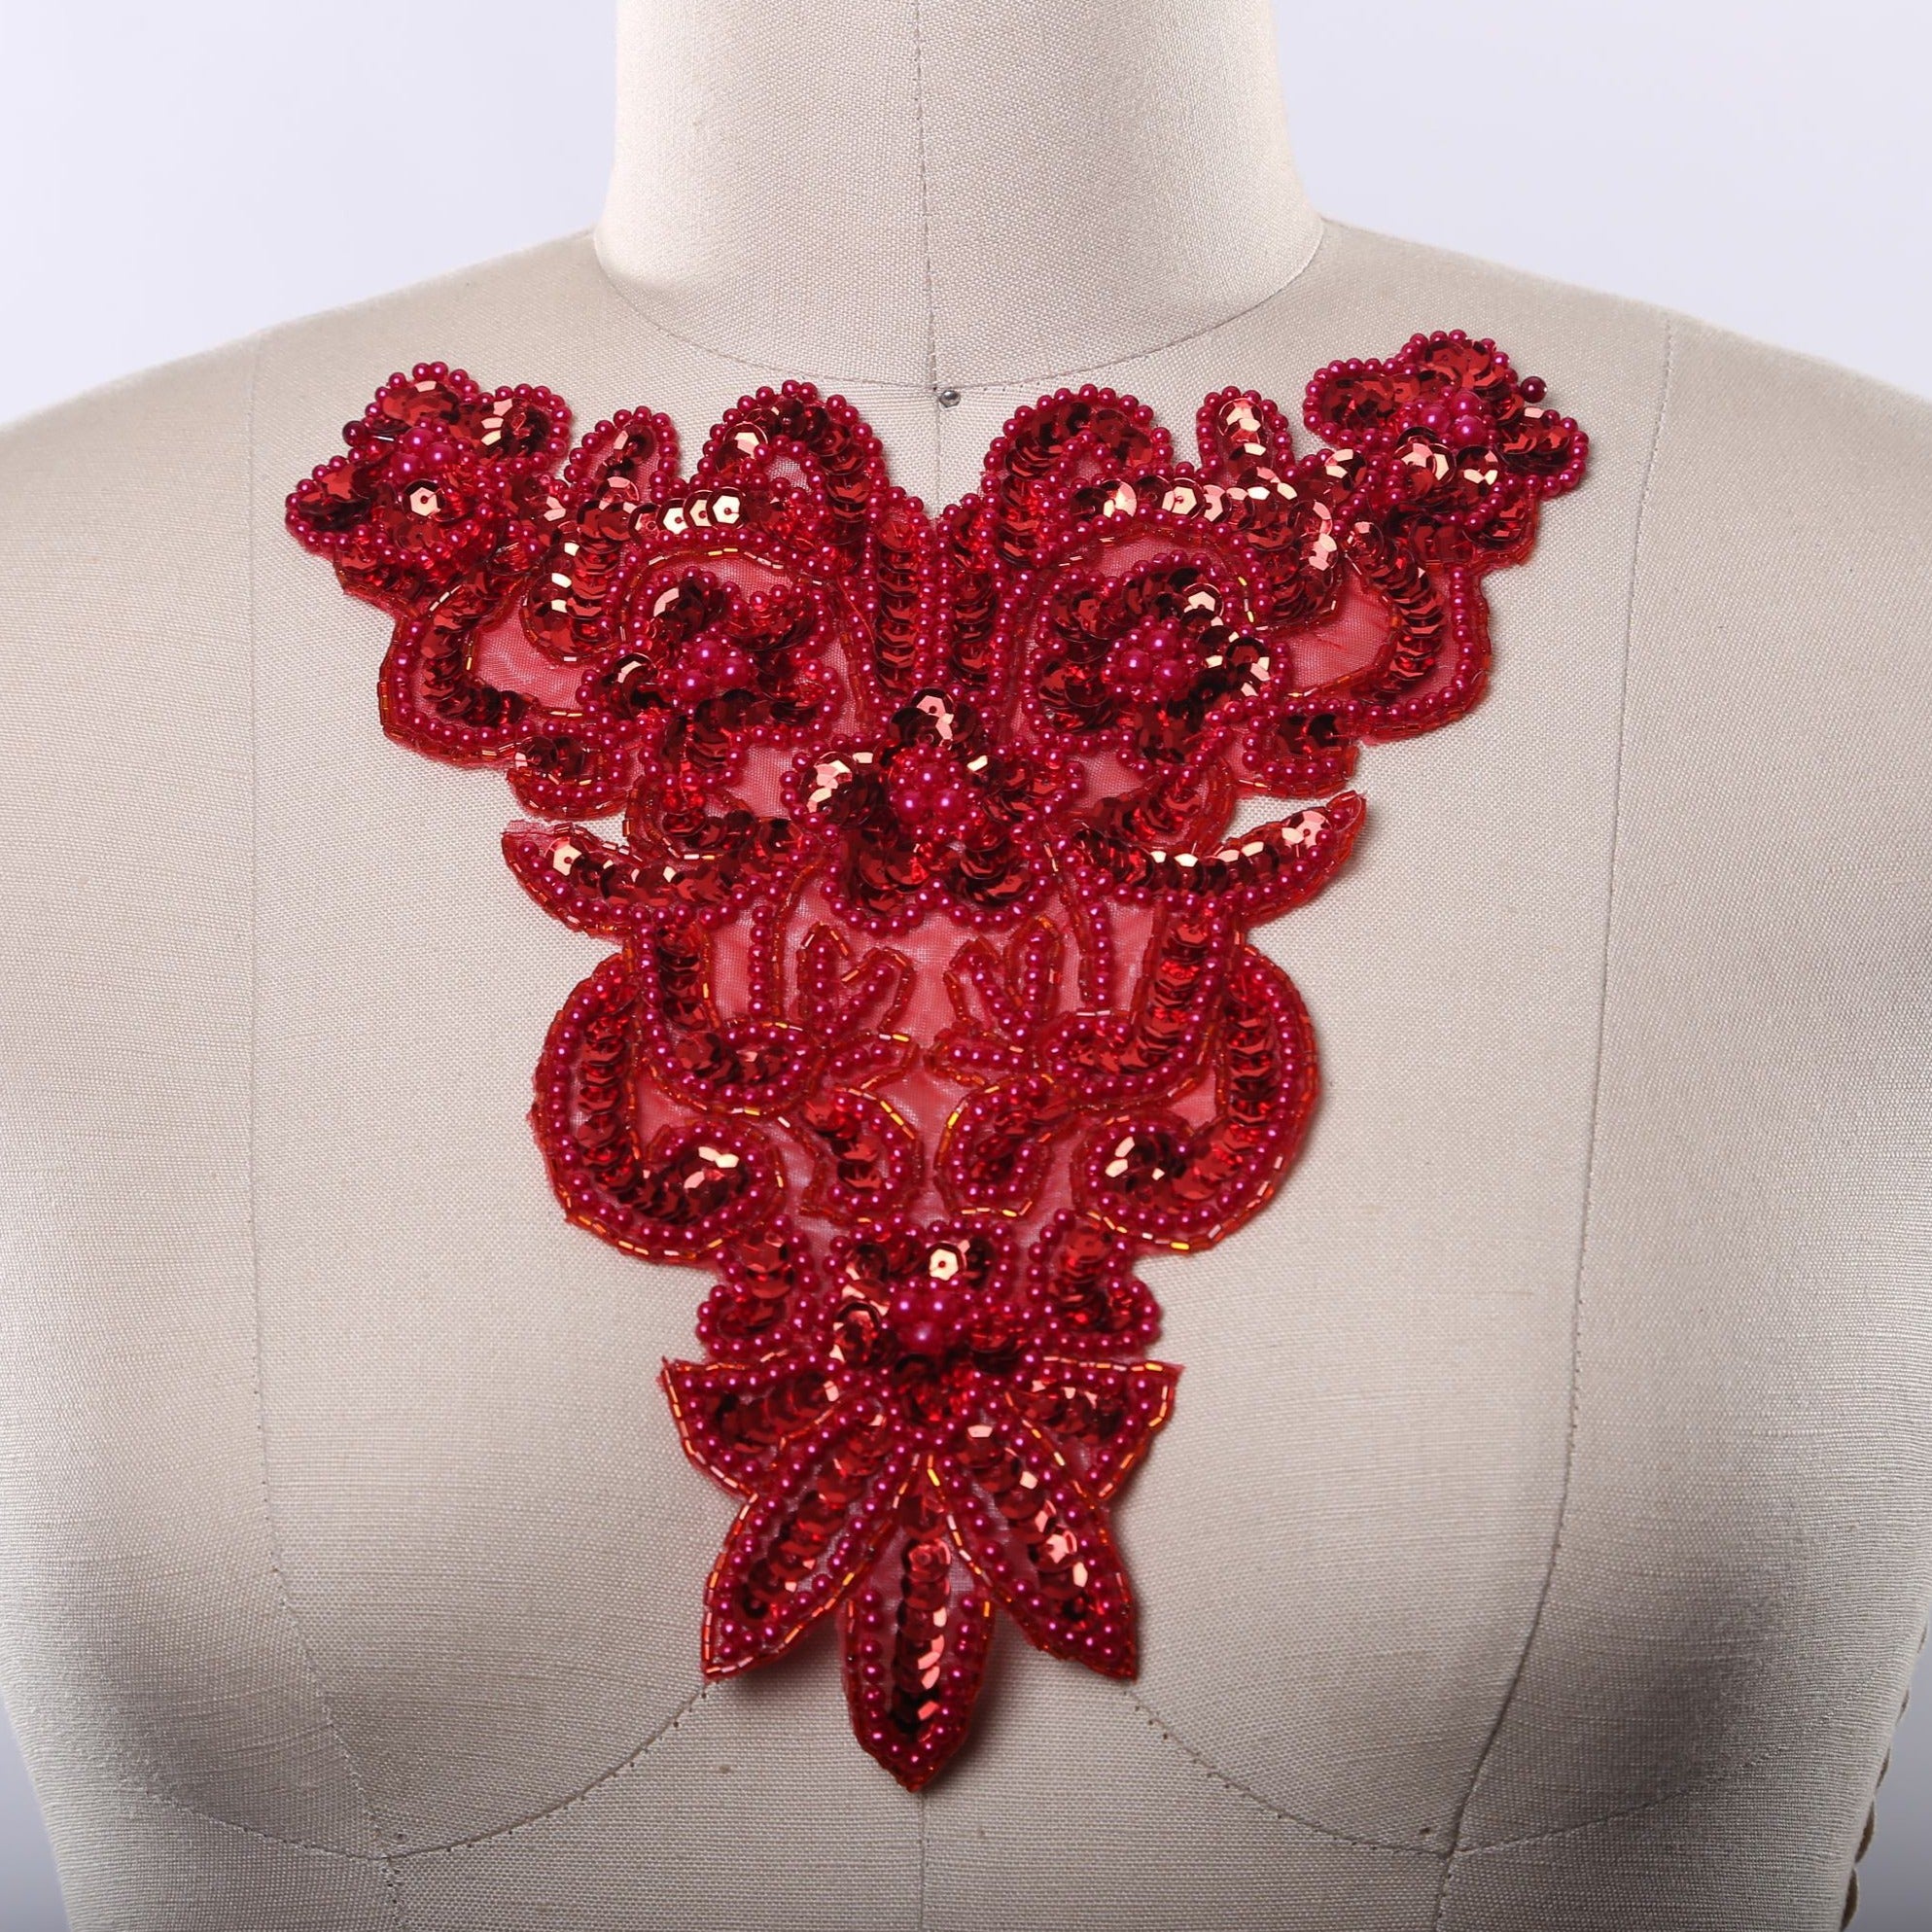 1 Red or White Beaded Sequined Patch Applique